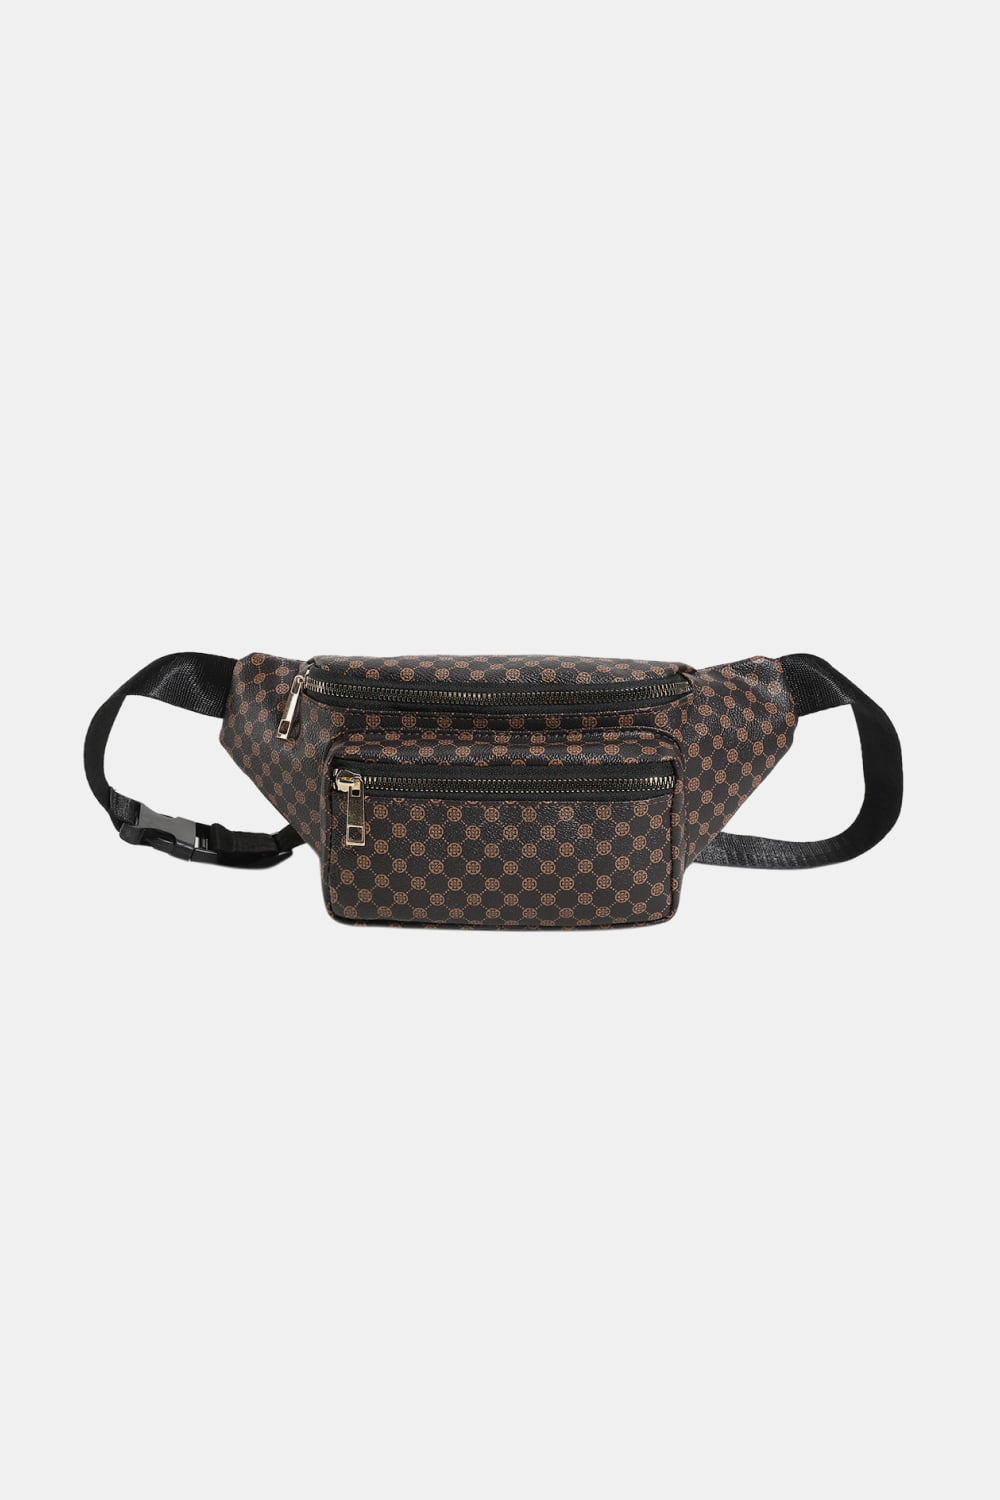 SO CHIC Printed PU Leather Sling Bag